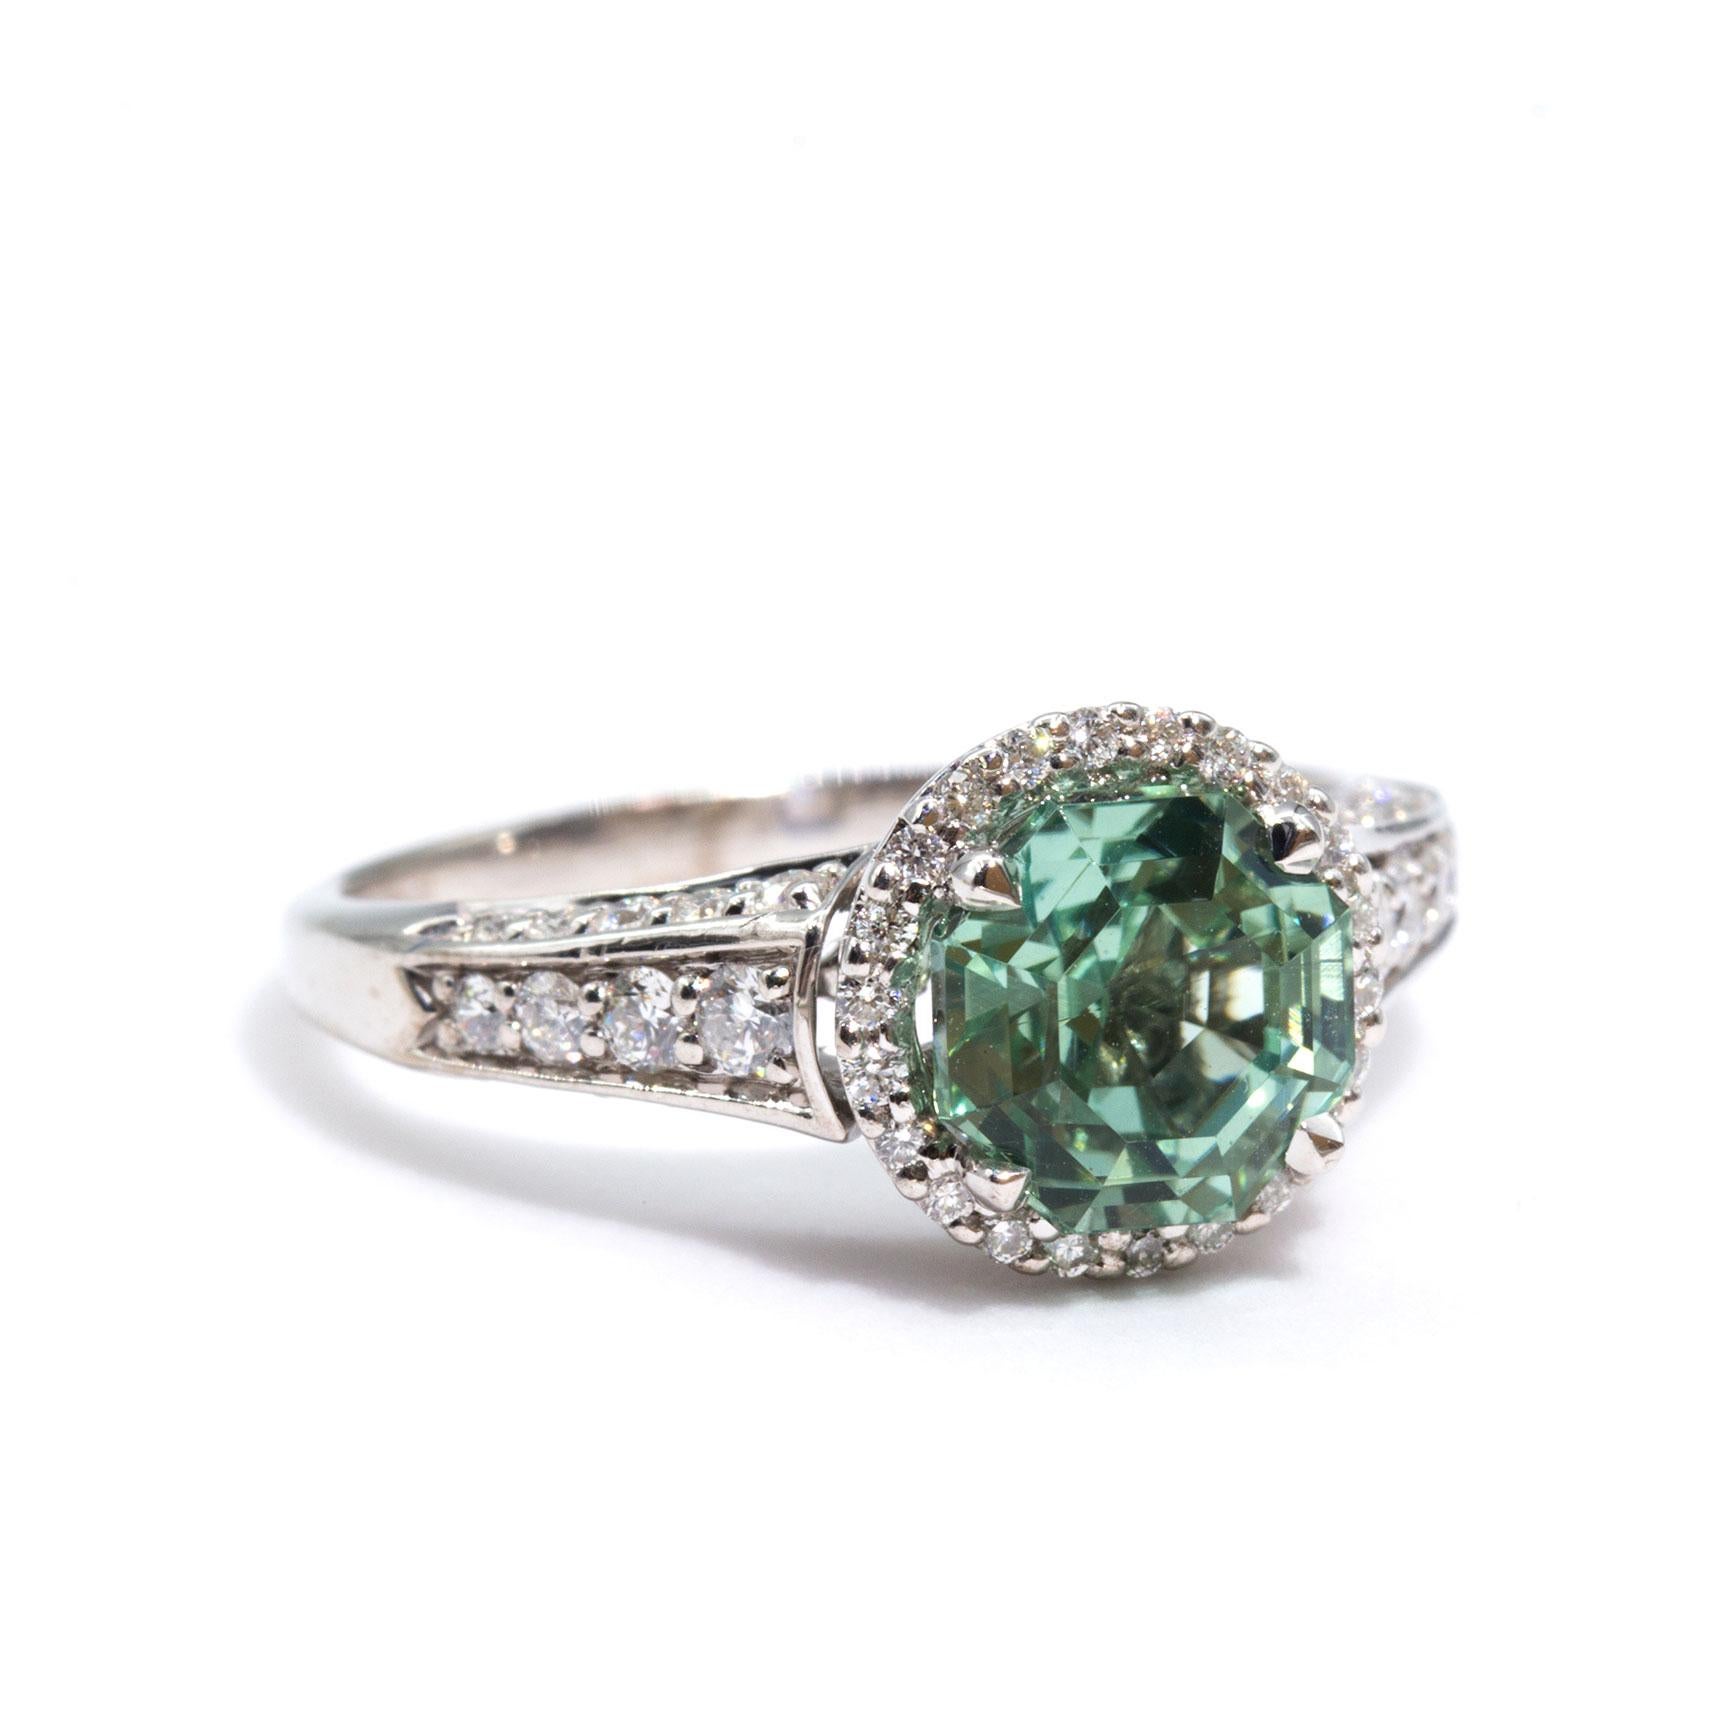 Crafted in 18 carat white gold is this unique vintage ring boasting a glorious 1.20 carat bright mint colour tourmaline and is encompassed by a halo of sparkling diamonds and is embellished with further round brilliant cut diamonds in the band. We